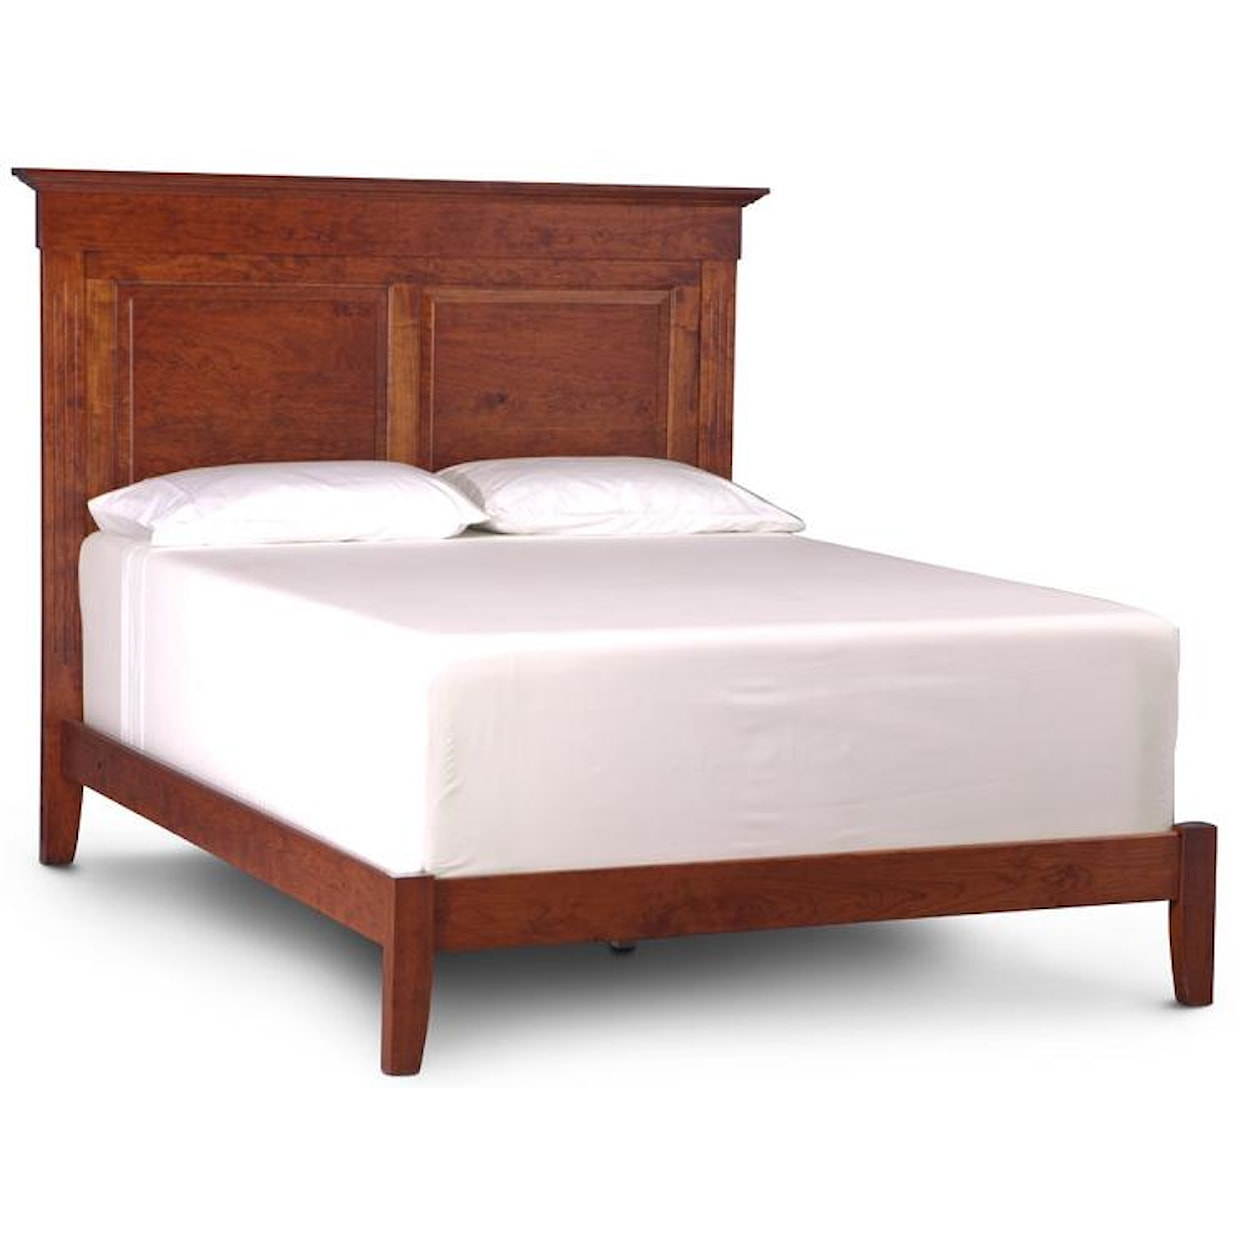 Simply Amish Express Full Shenandoah Deluxe Bed with Wood Frame 